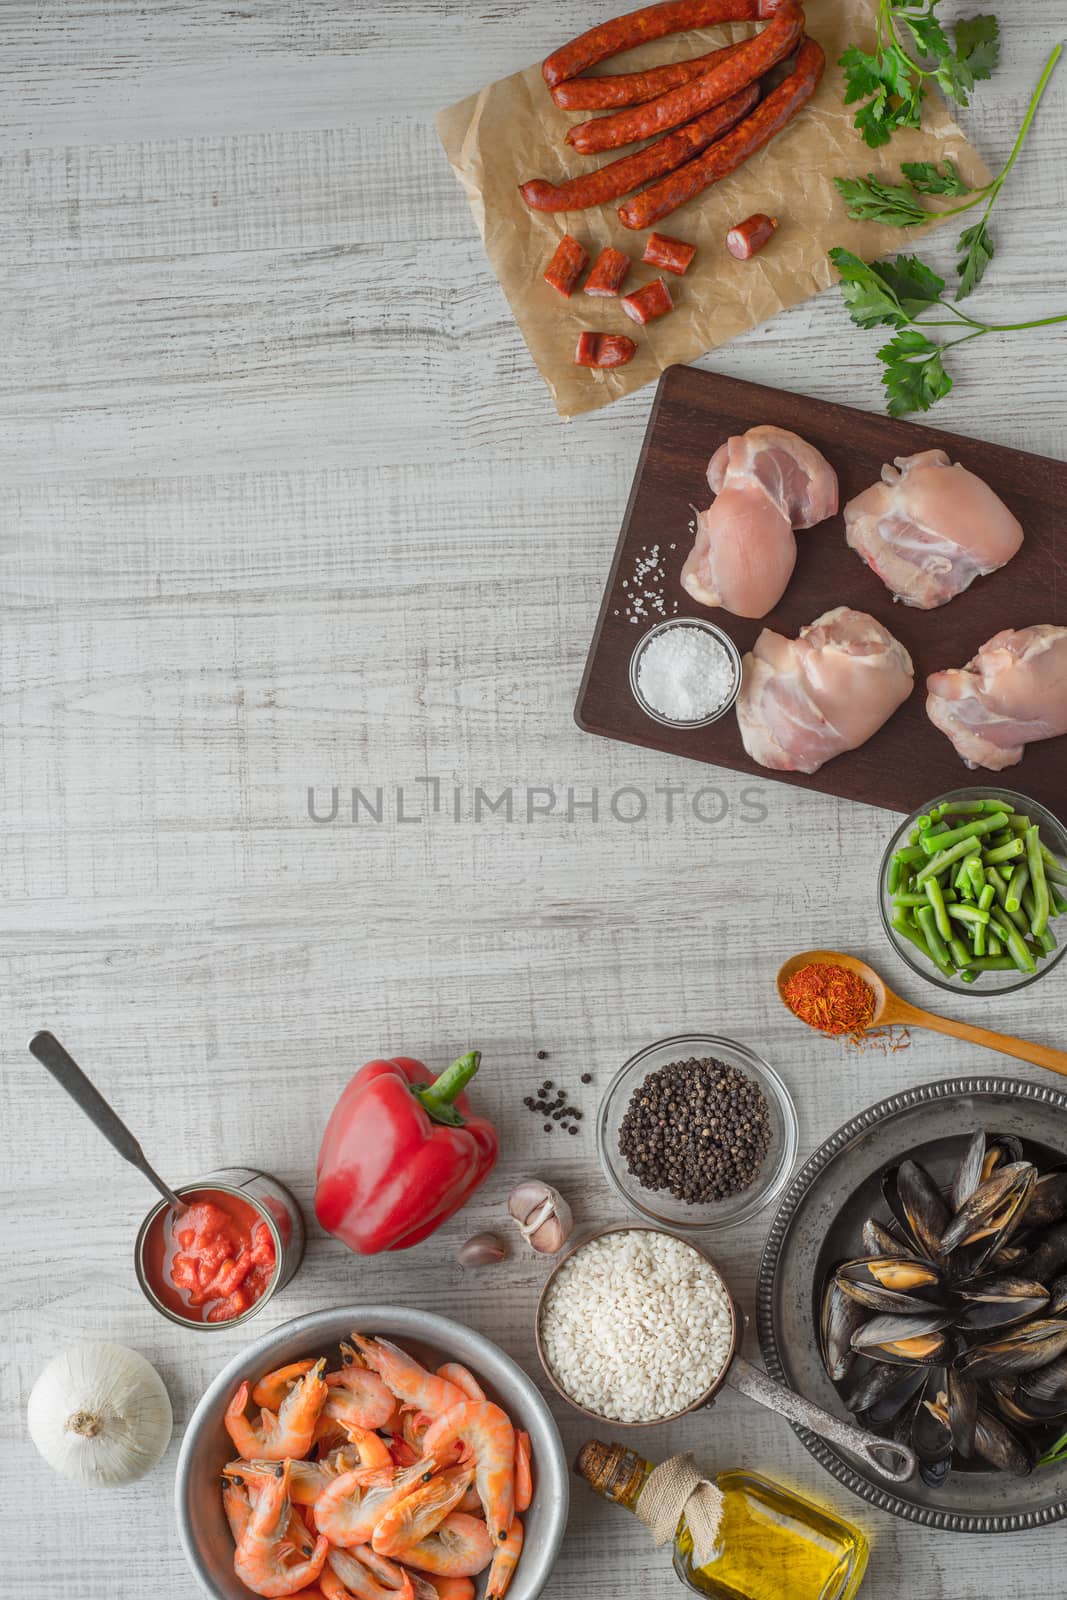 Ingredients for paella on the white  wooden table vertical